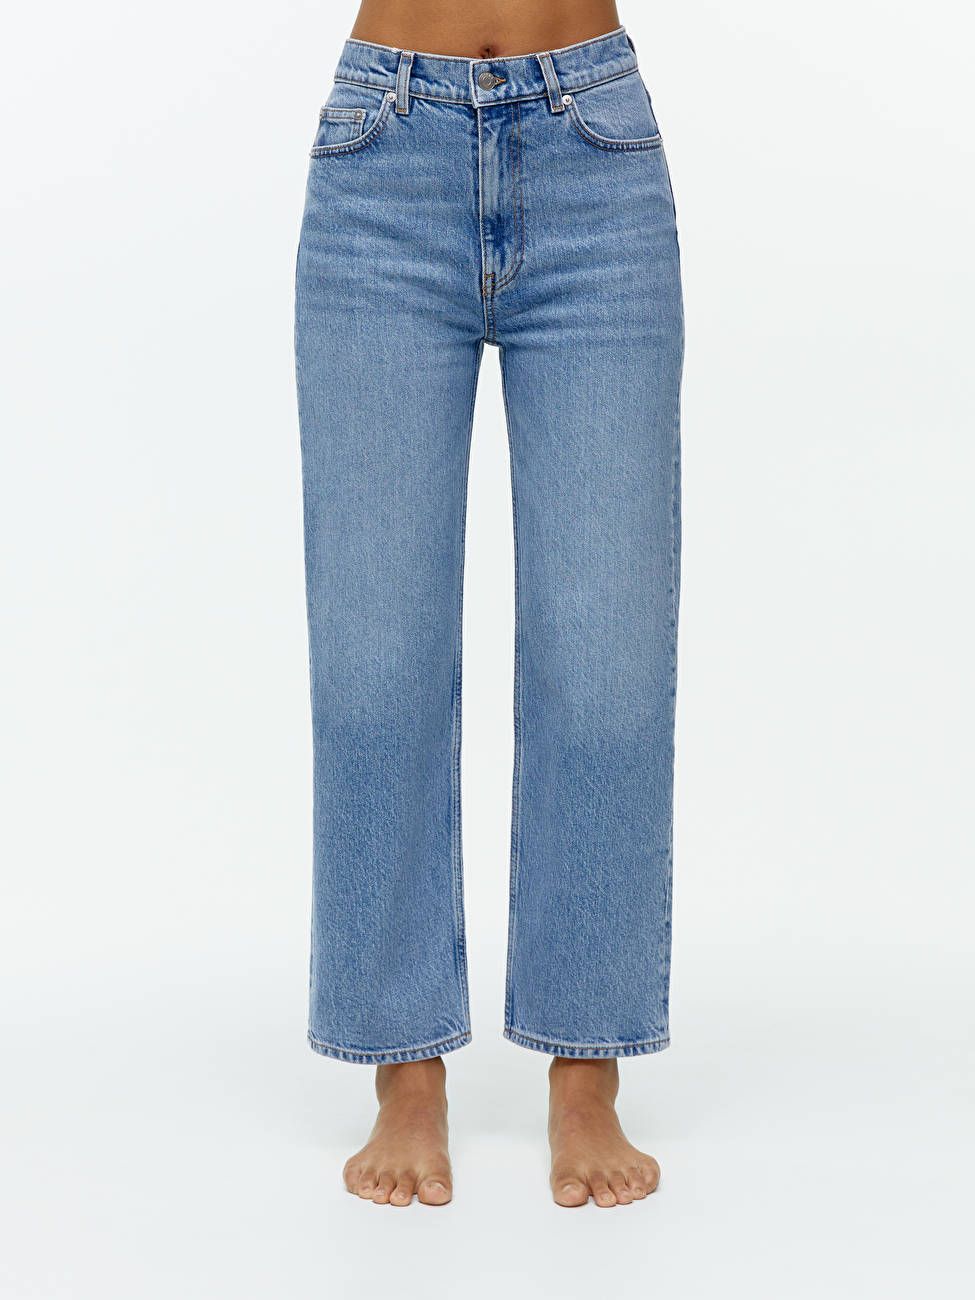 ROSE Cropped Straight Stretch Jeans | ARKET